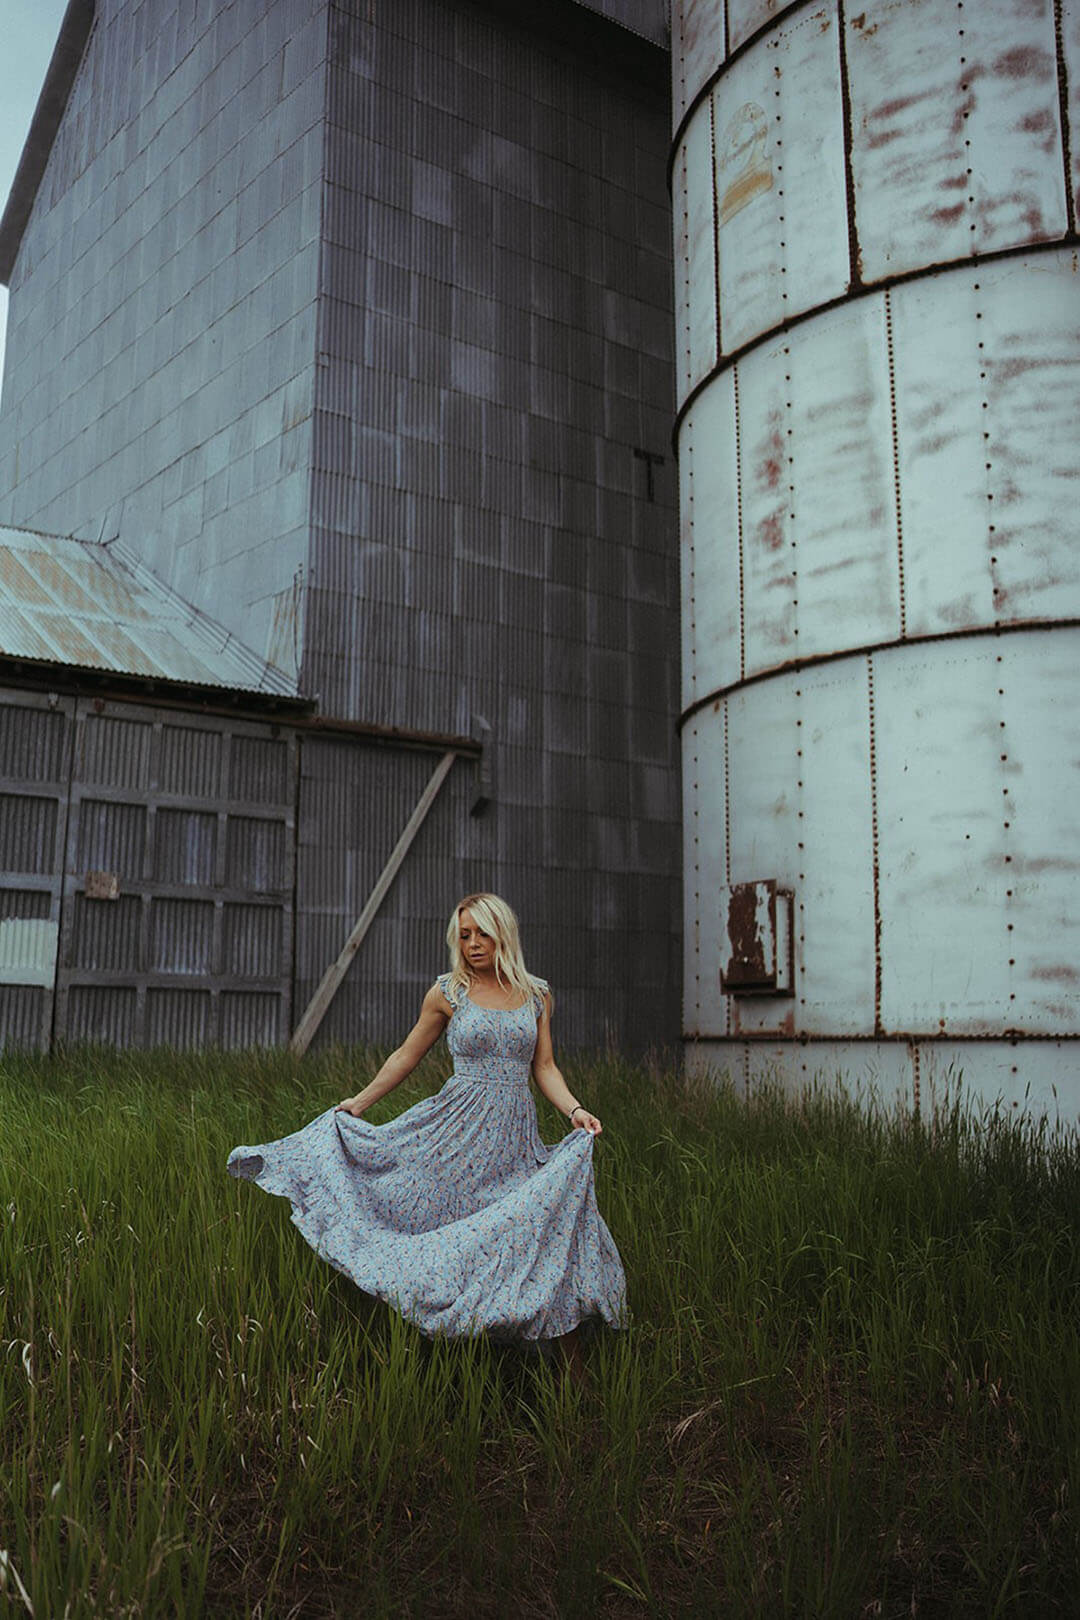 Woman standing in Tall Grass modeling the Floral Tiered Maxi Dress by Rock & Roll Denim.